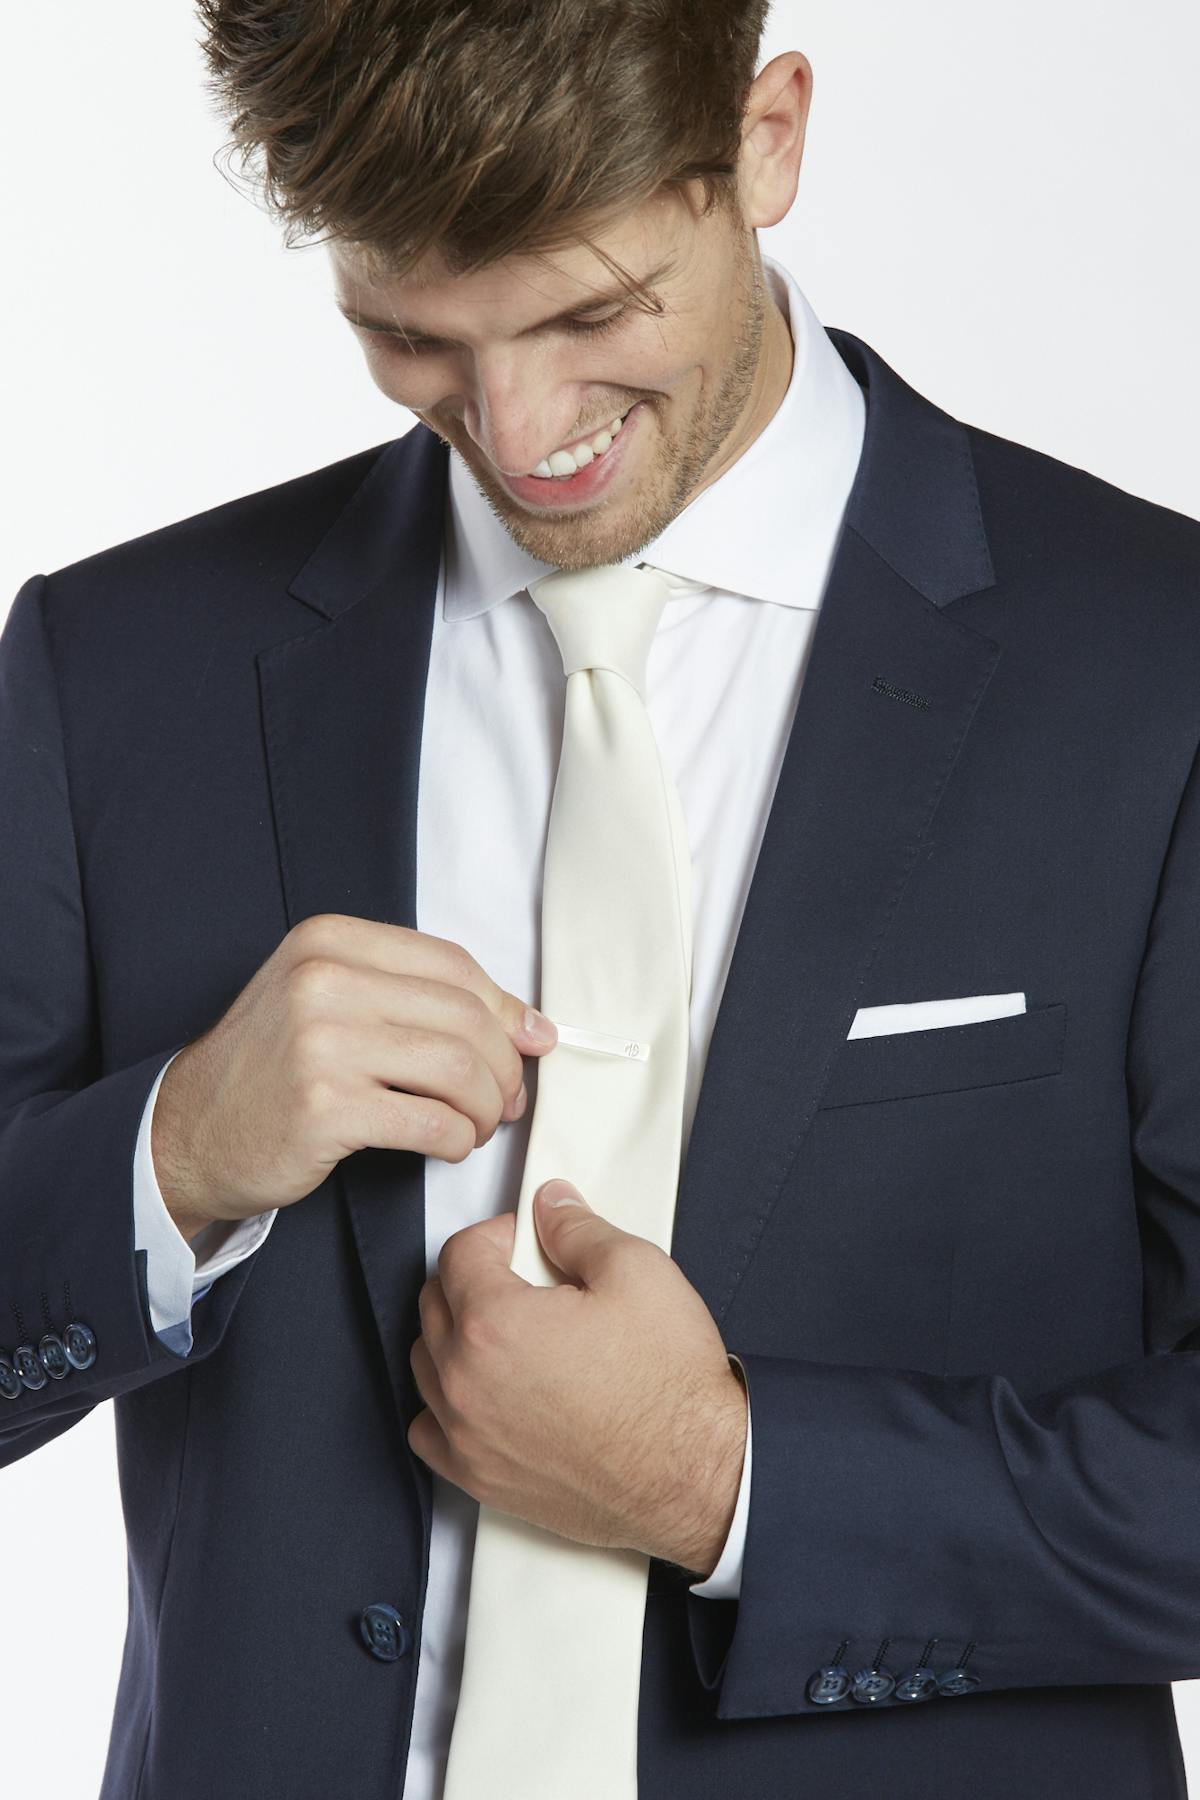 Men's Wedding Accessories: How To Place a Tie Bar